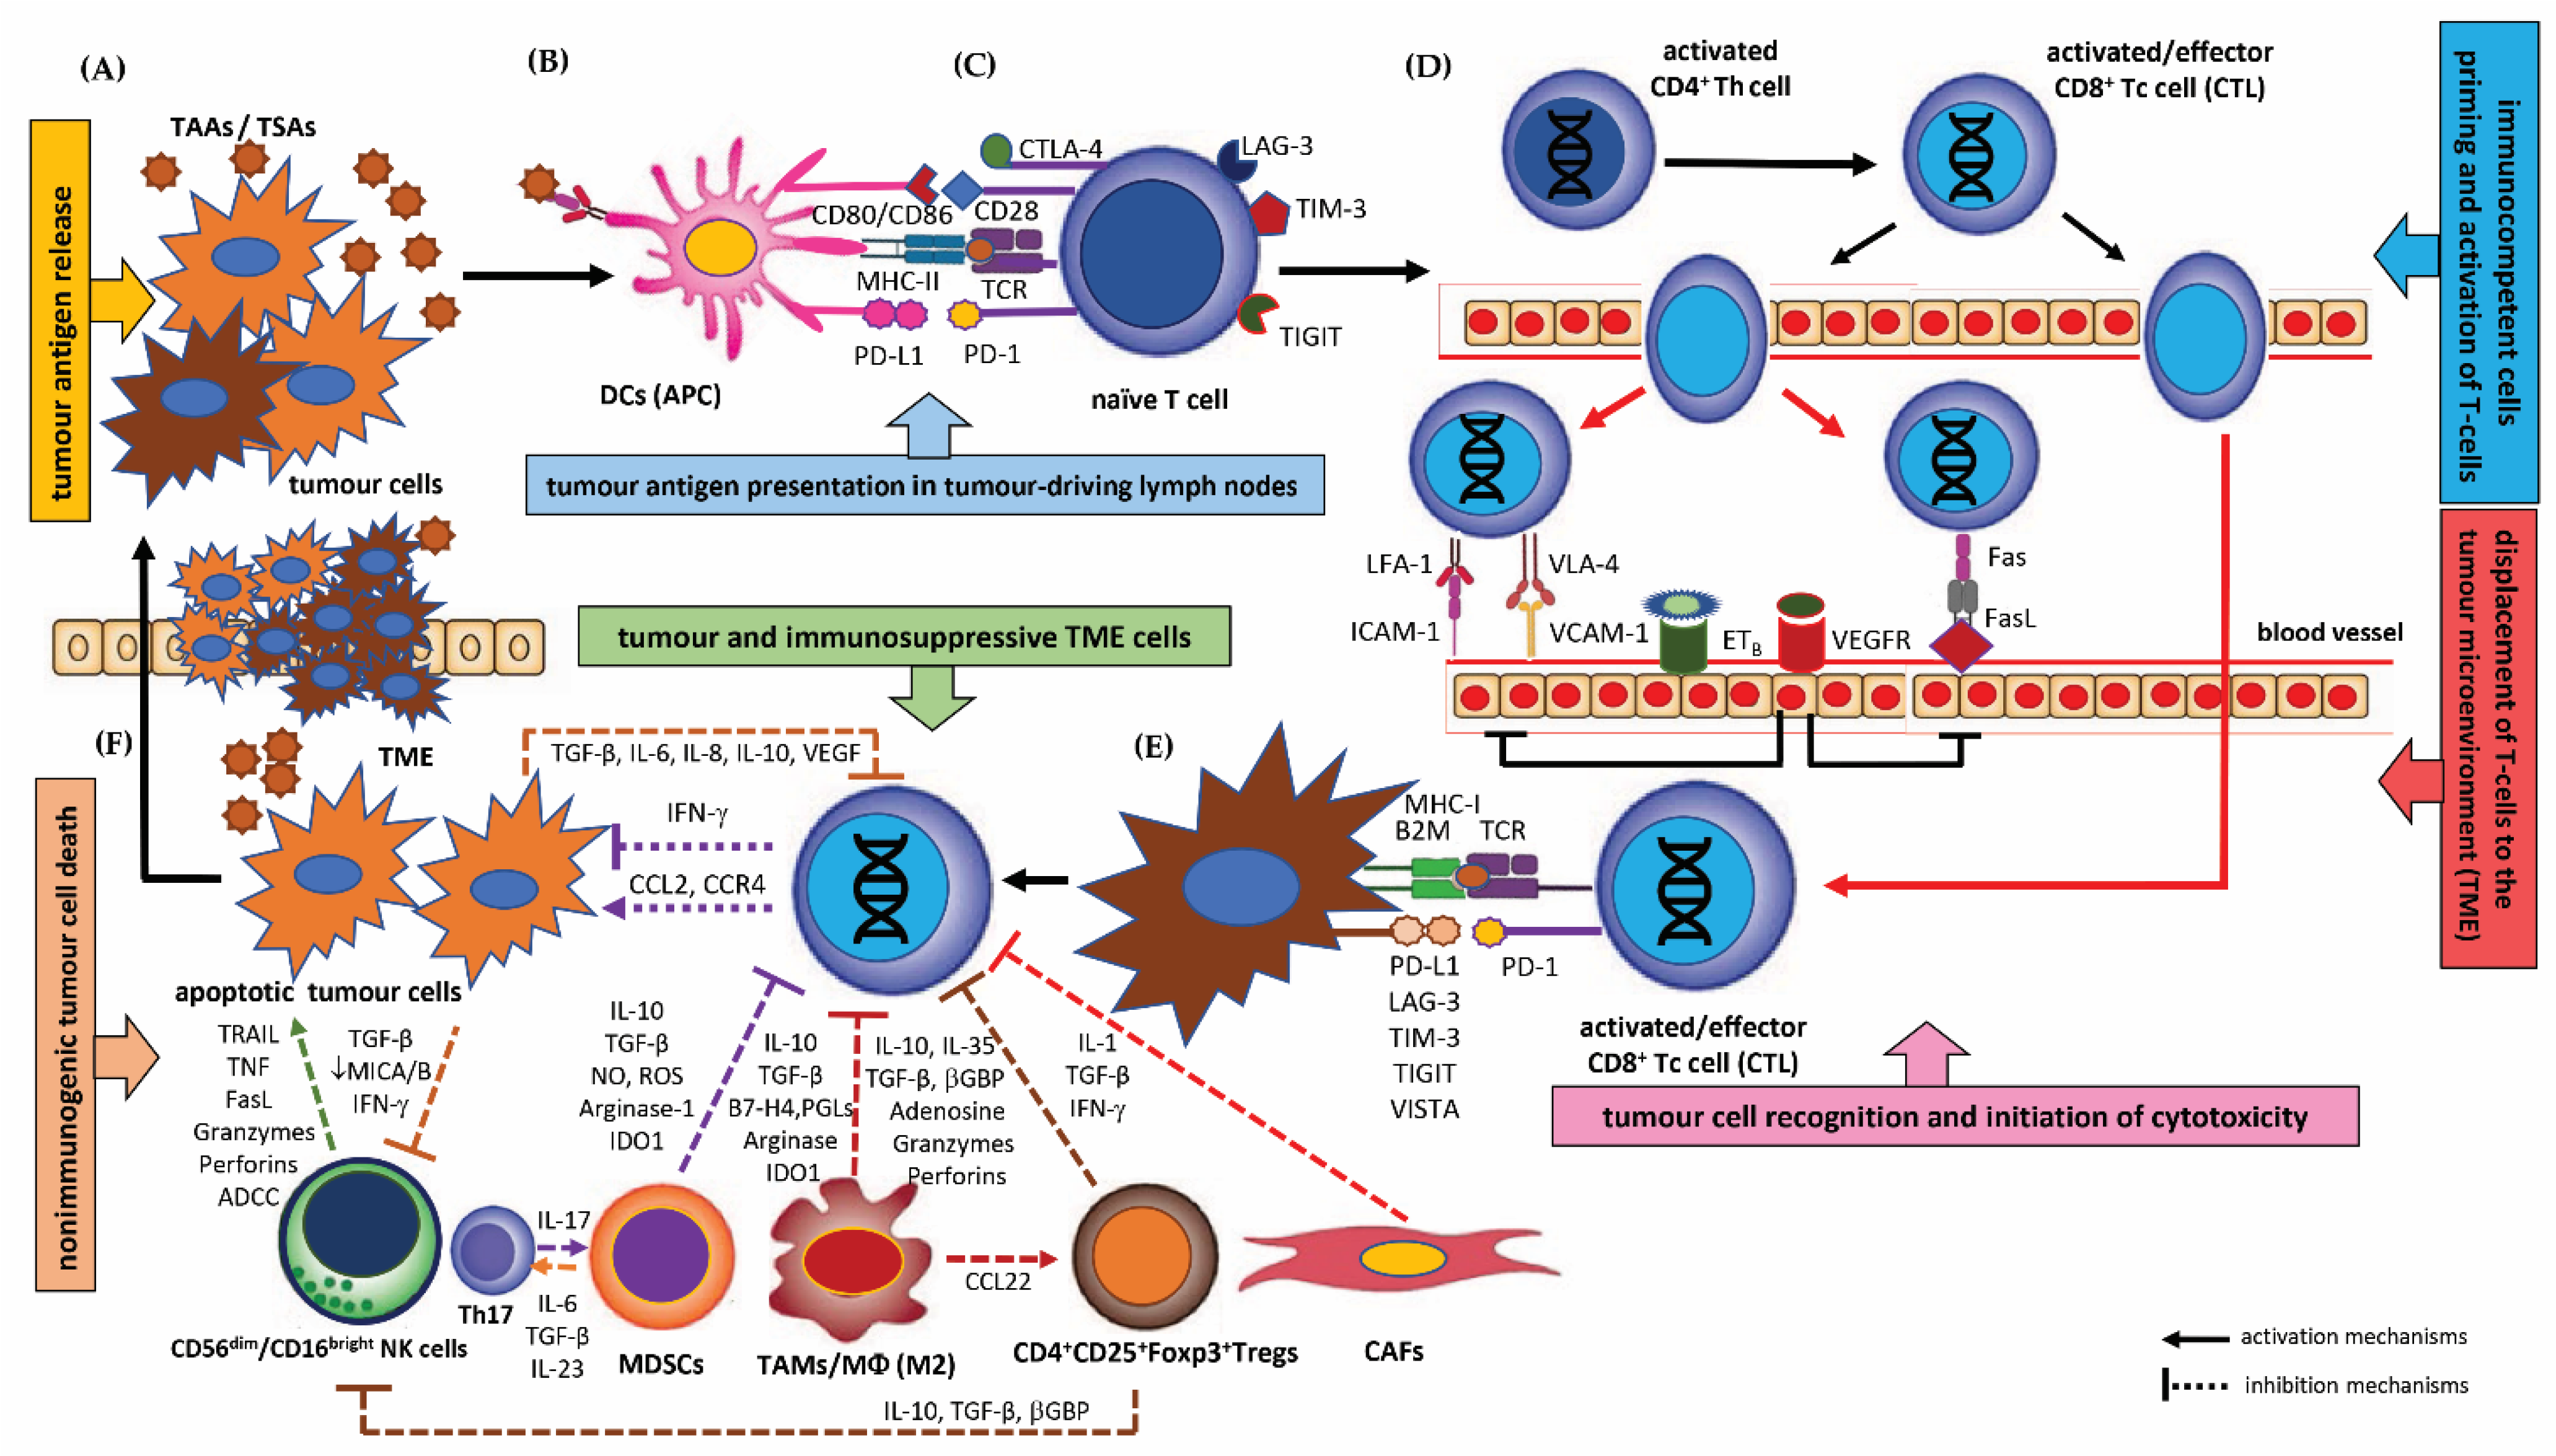 Cancers Free Full-Text The Role of Different Immunocompetent Cell Populations in the Pathogenesis of Head and Neck Cancerandmdash;Regulatory Mechanisms of Pro- and Anti-Cancer Activity and Their Impact on Immunotherapy pic